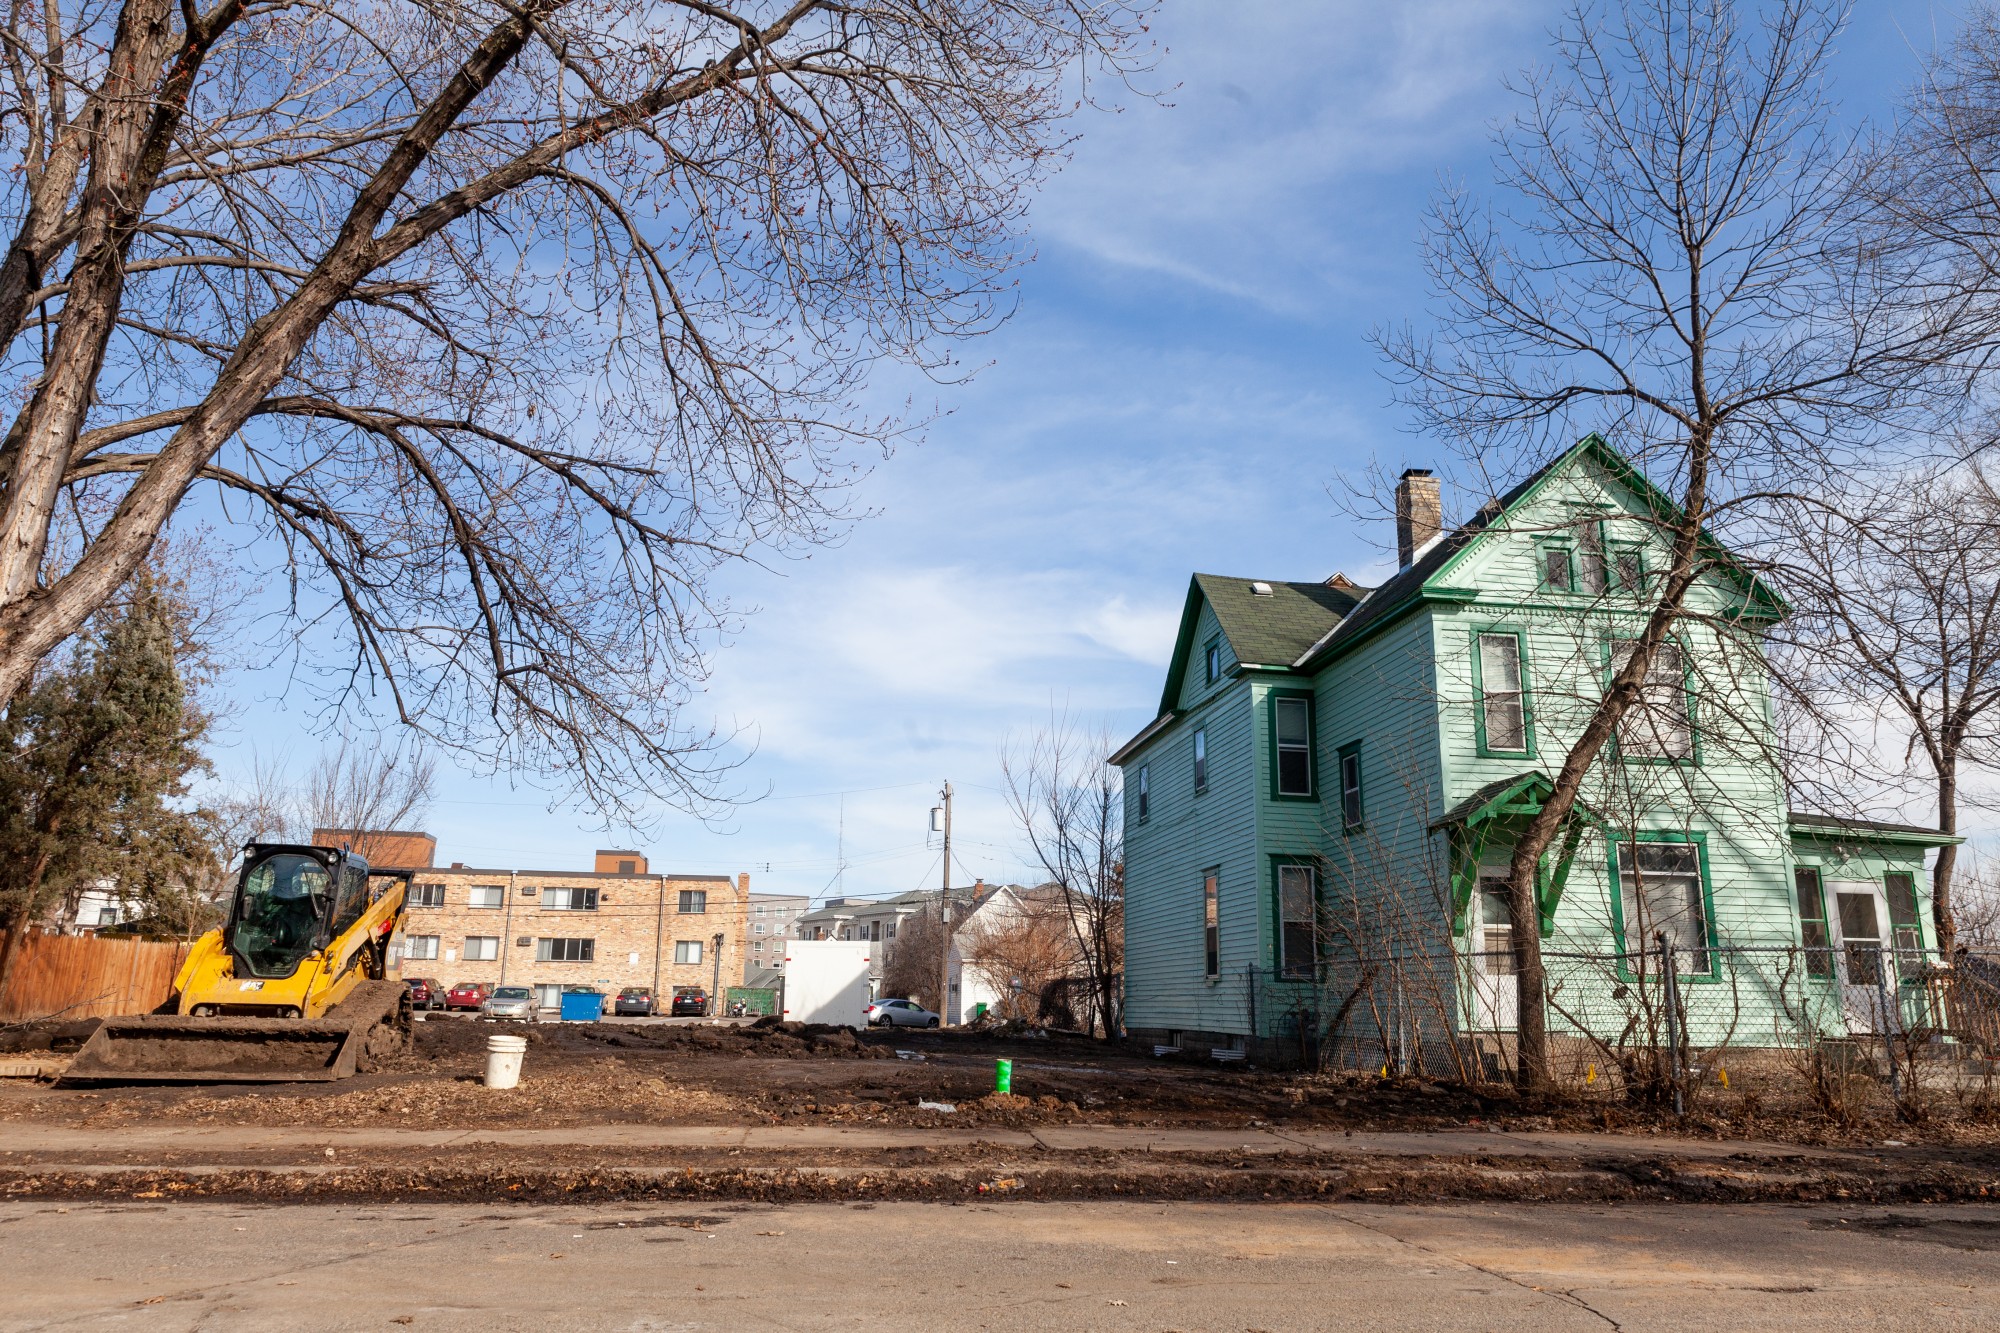 Construction equipment stands ready on an empty plot beside homes on Erie Street Southeast on Friday, March 13. Several homes on the block are set to be demolished as part of a broad plan for the future clinical campus facility.